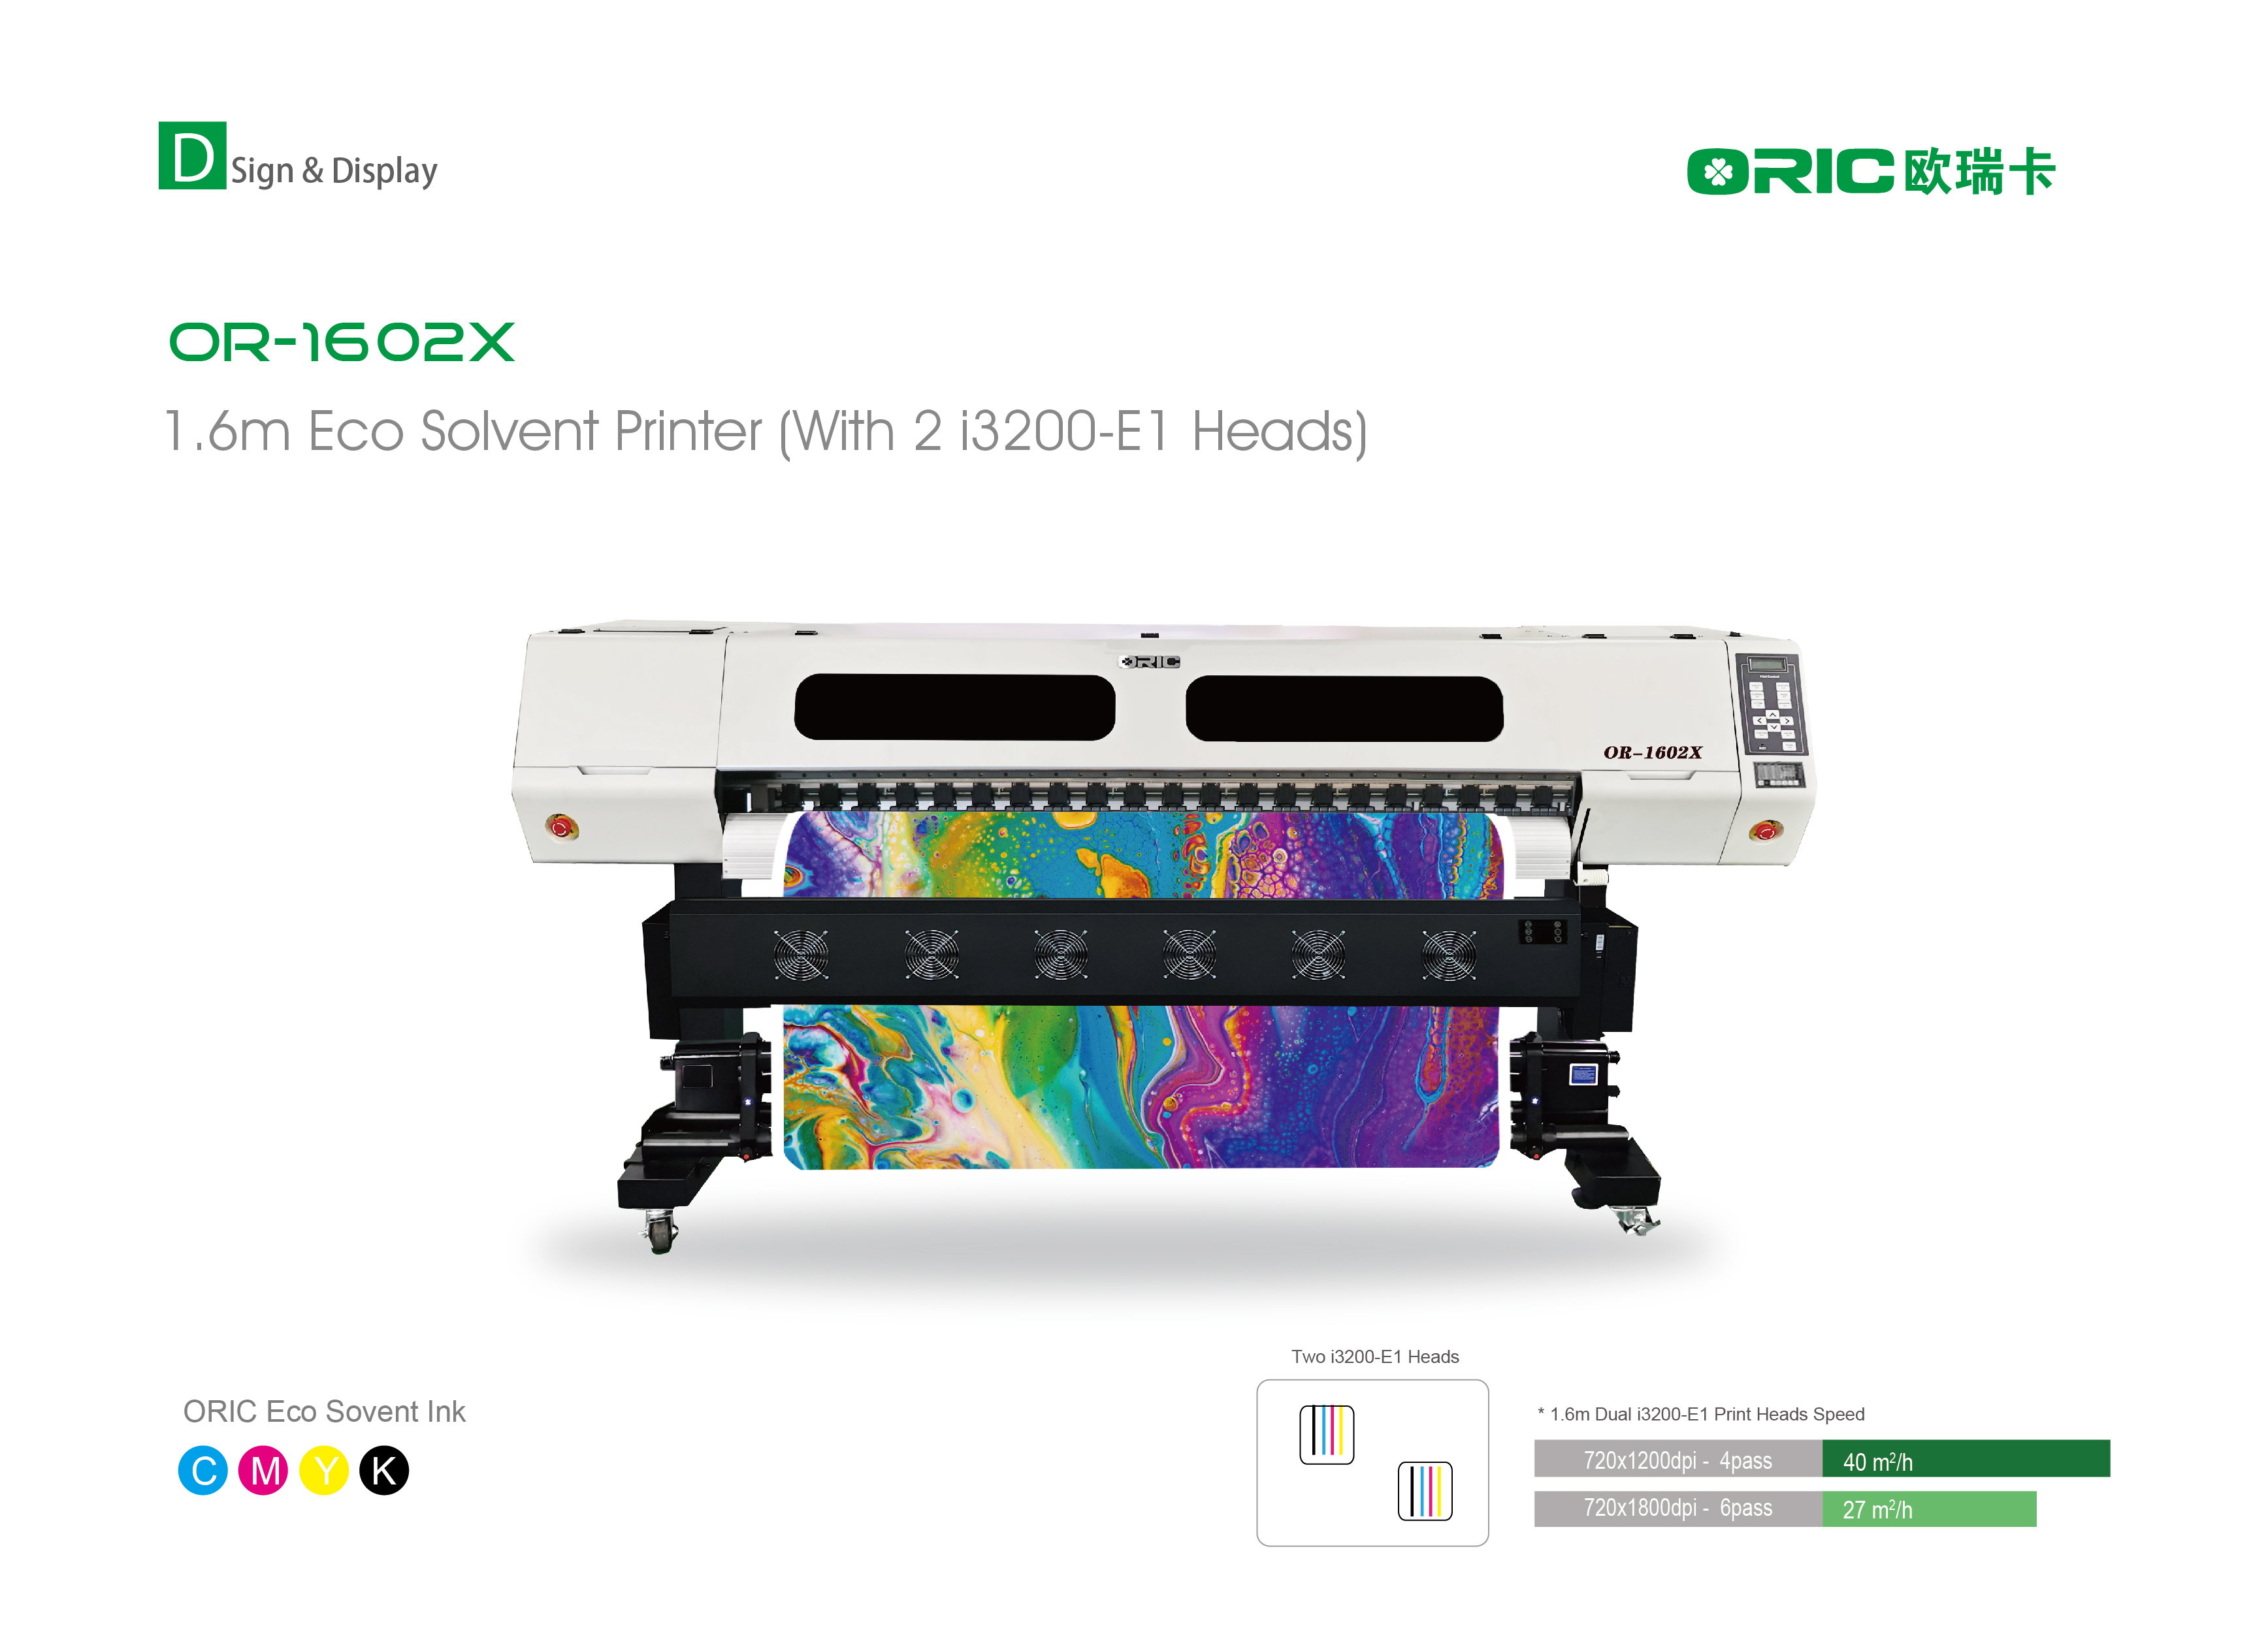 Or 1602s 1 6m Eco Solvent Printer With Double I3200 E1 Print Heads From